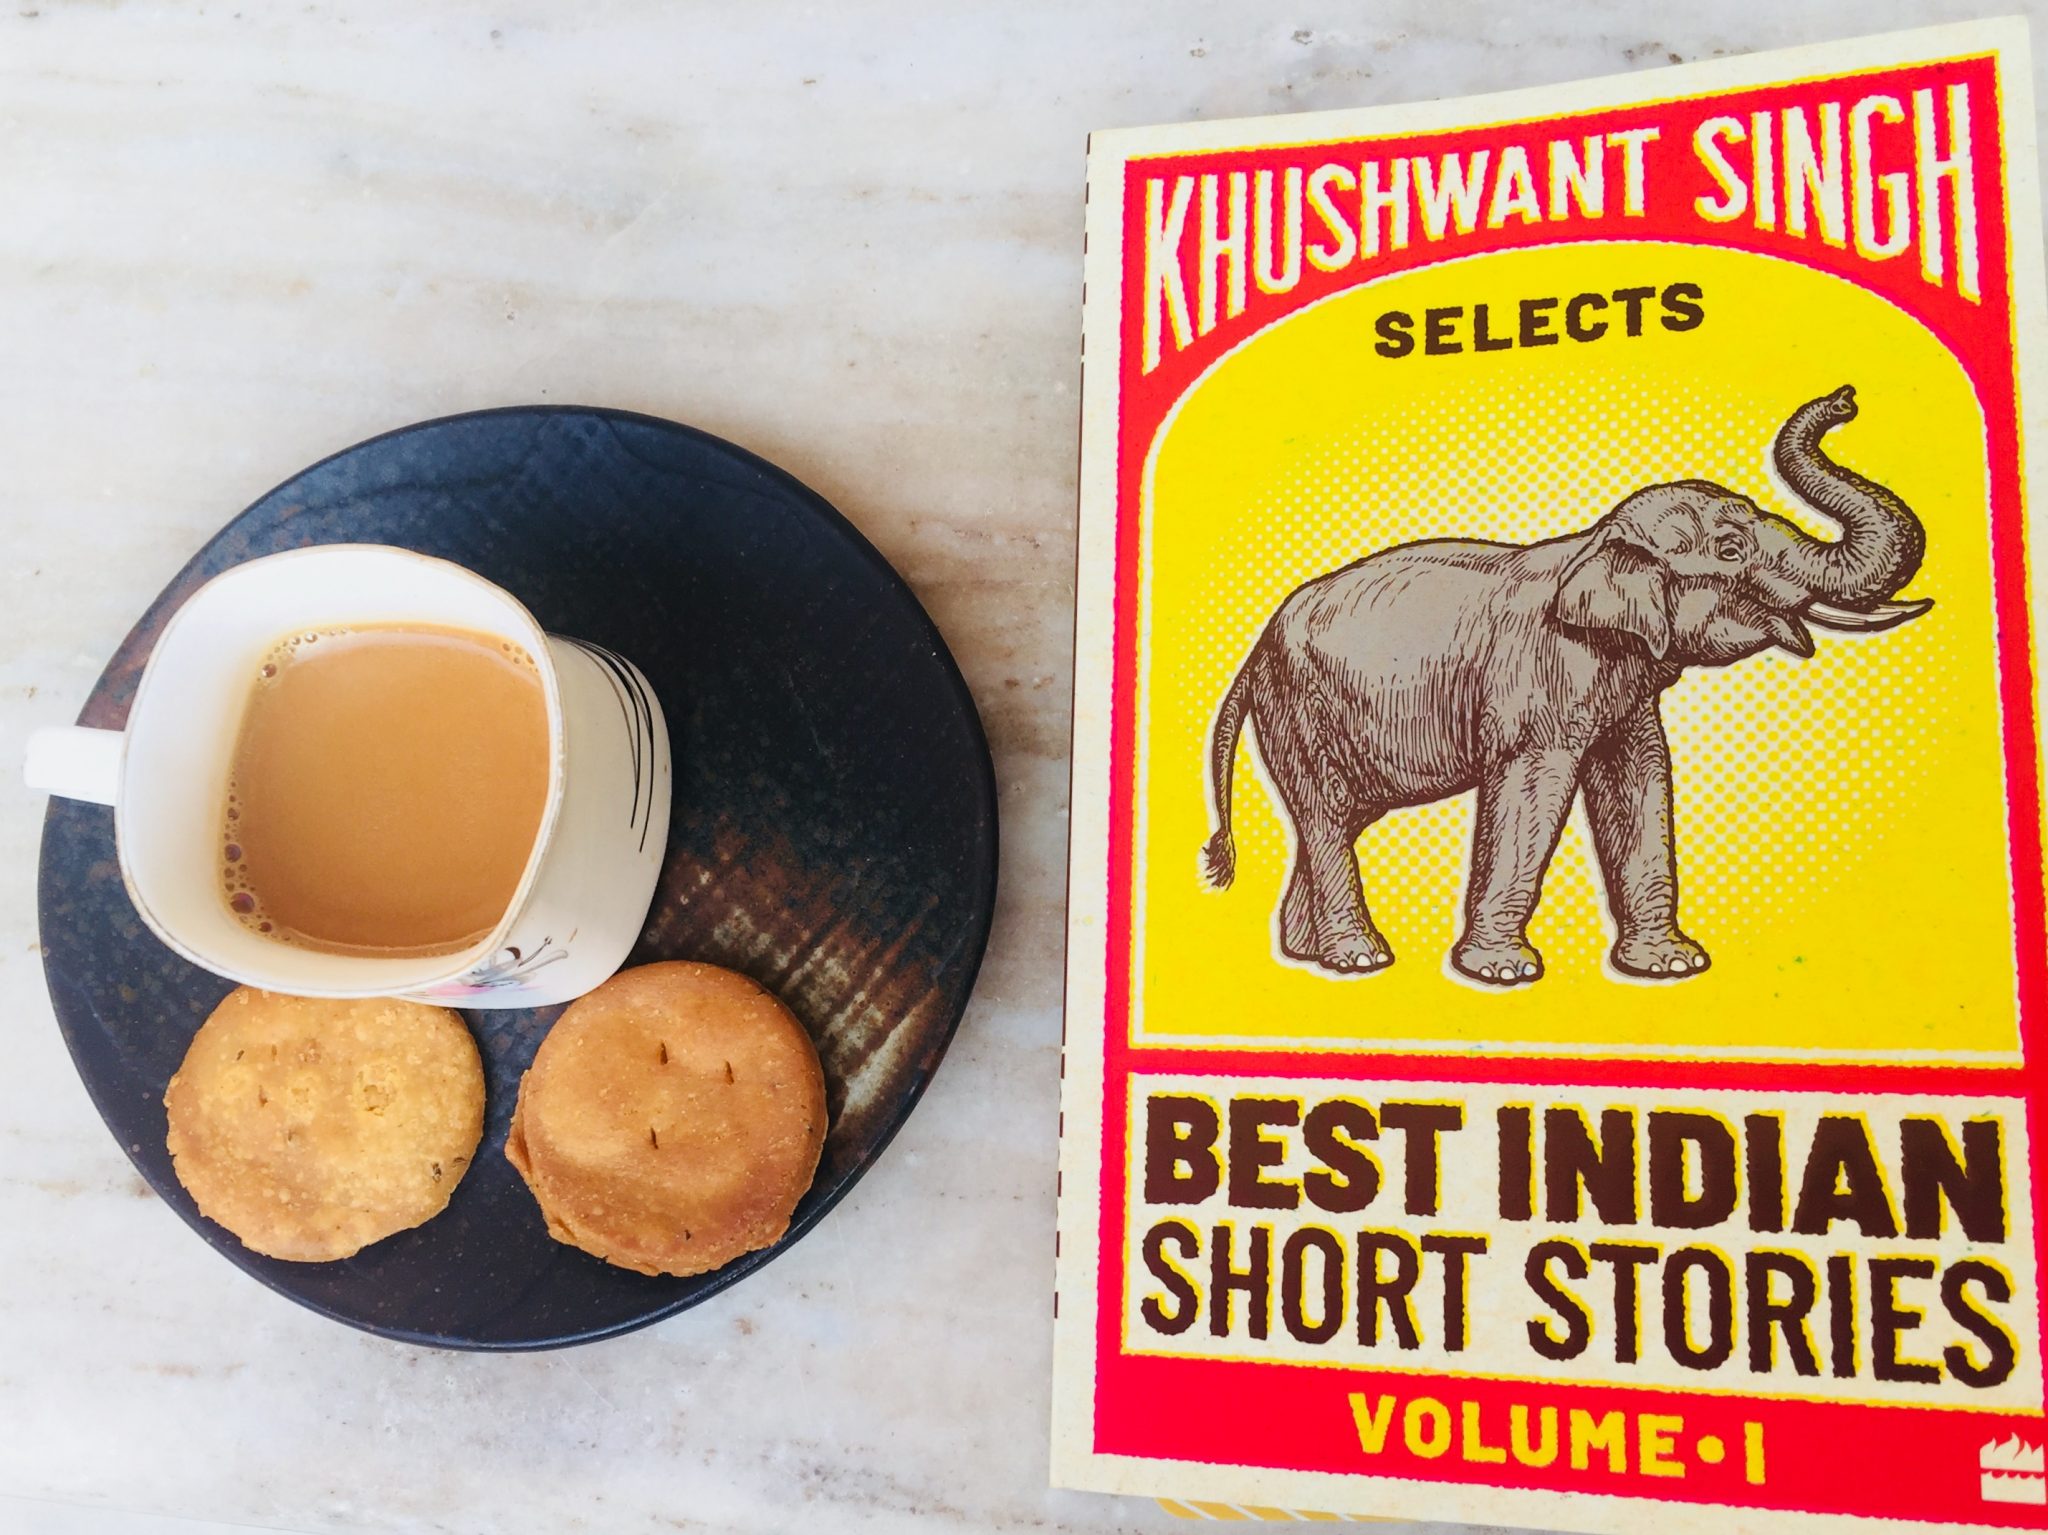 Khushwant Singh selects best Indian stories volume – 1 Book review